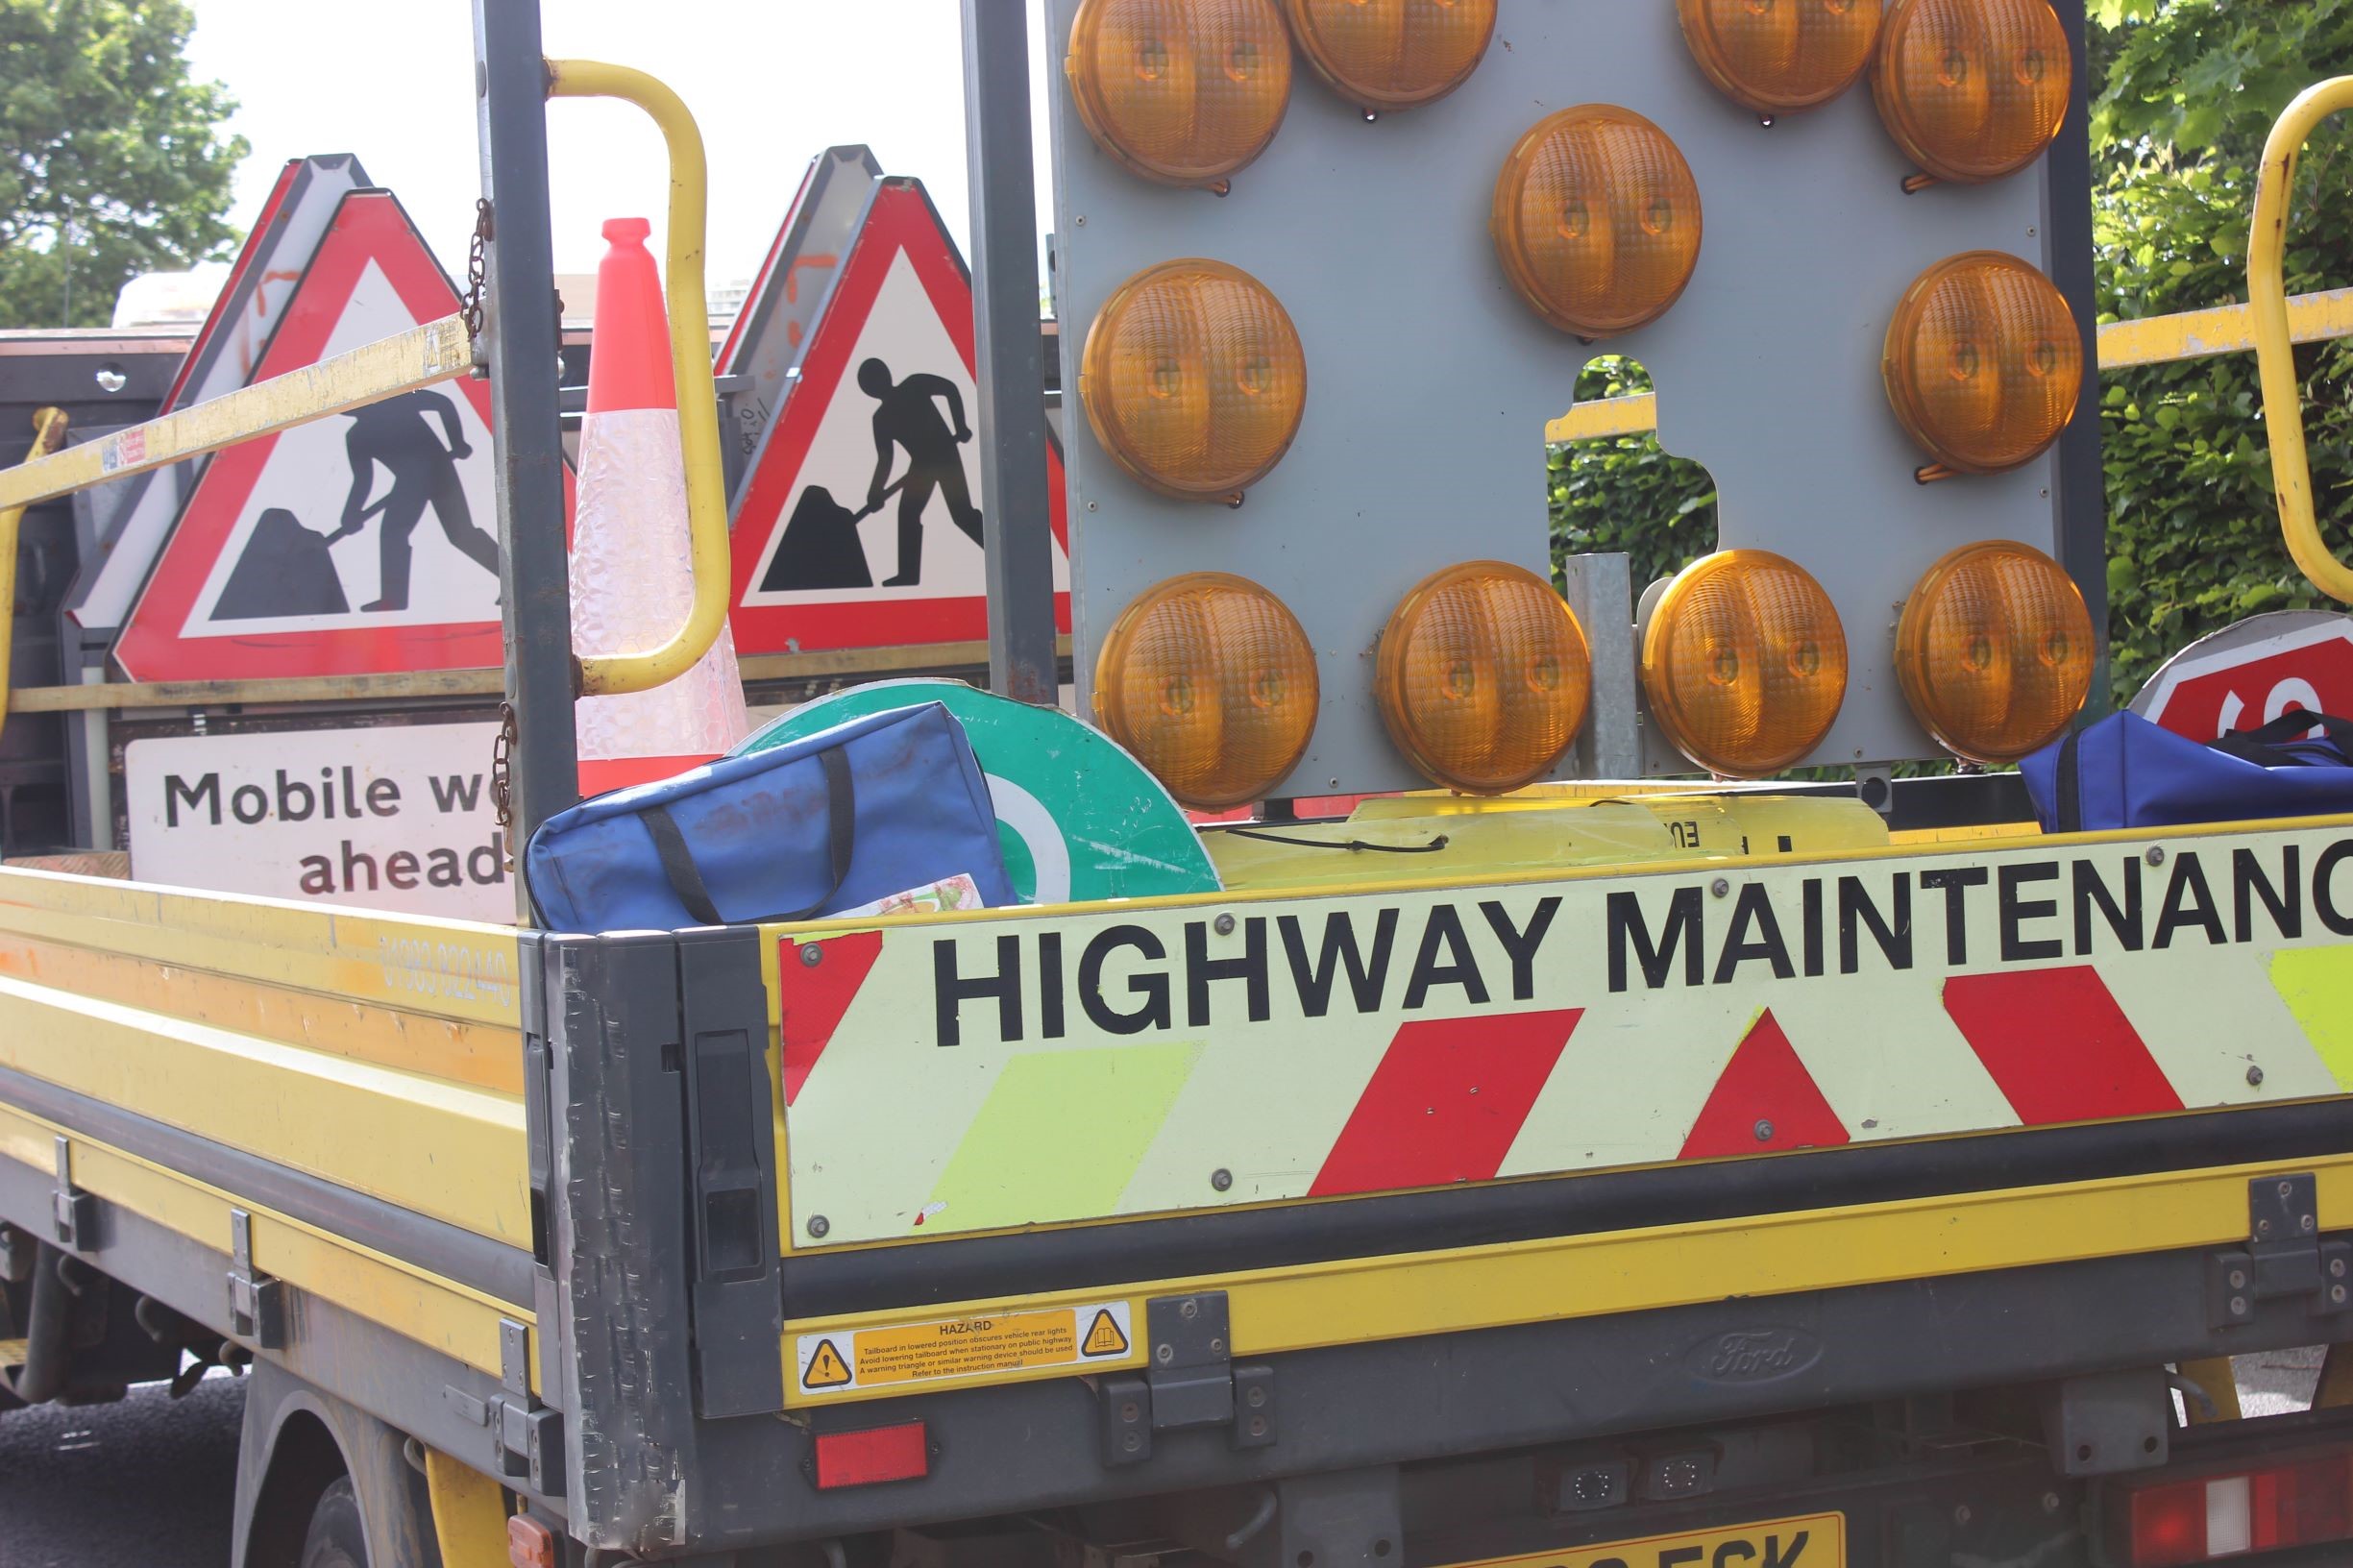 Photo showing highway maintenance vehicle loaded up with signage for site works